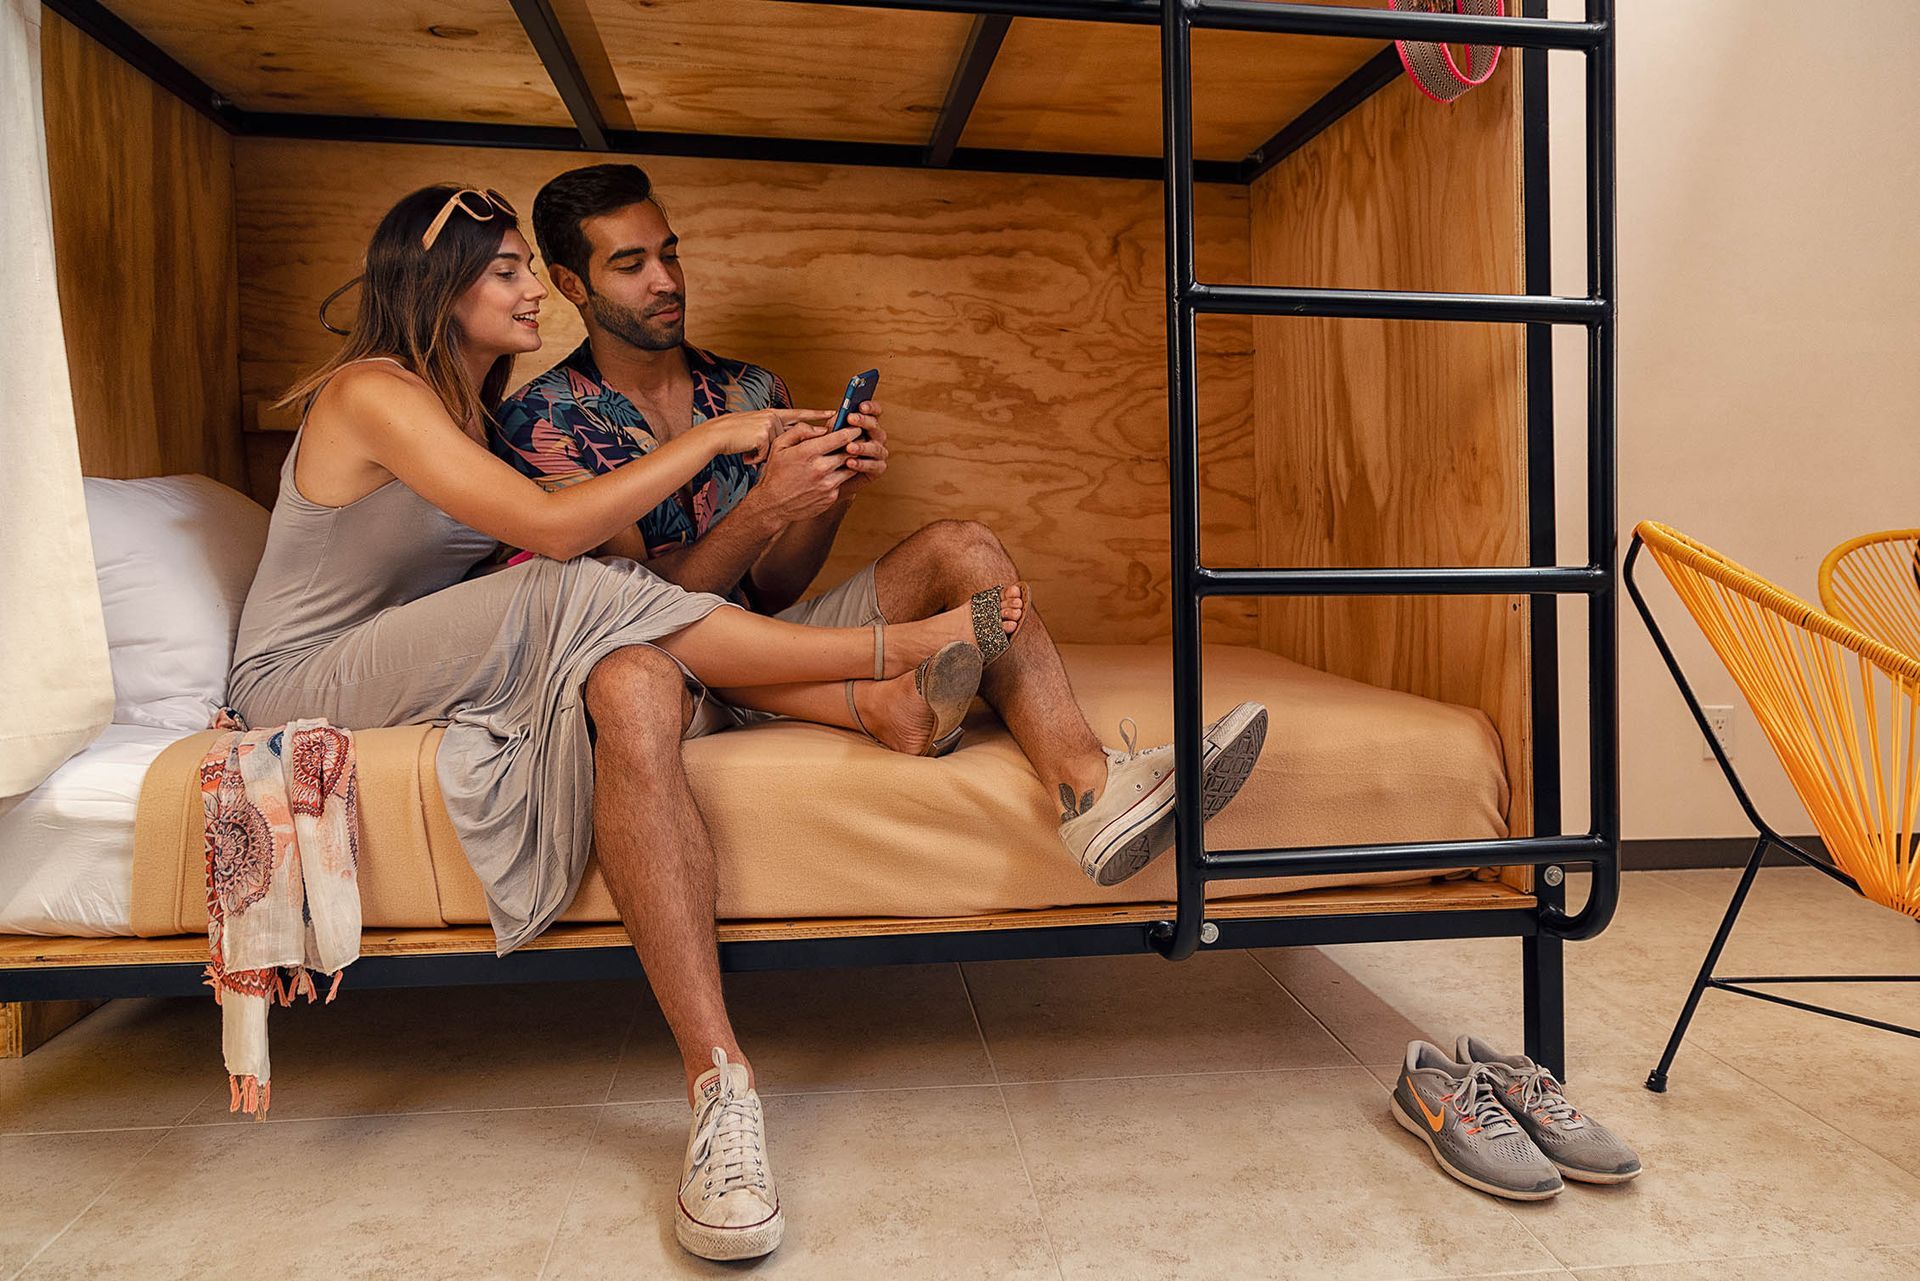 A man and a woman are sitting on a bunk bed looking at their phones.